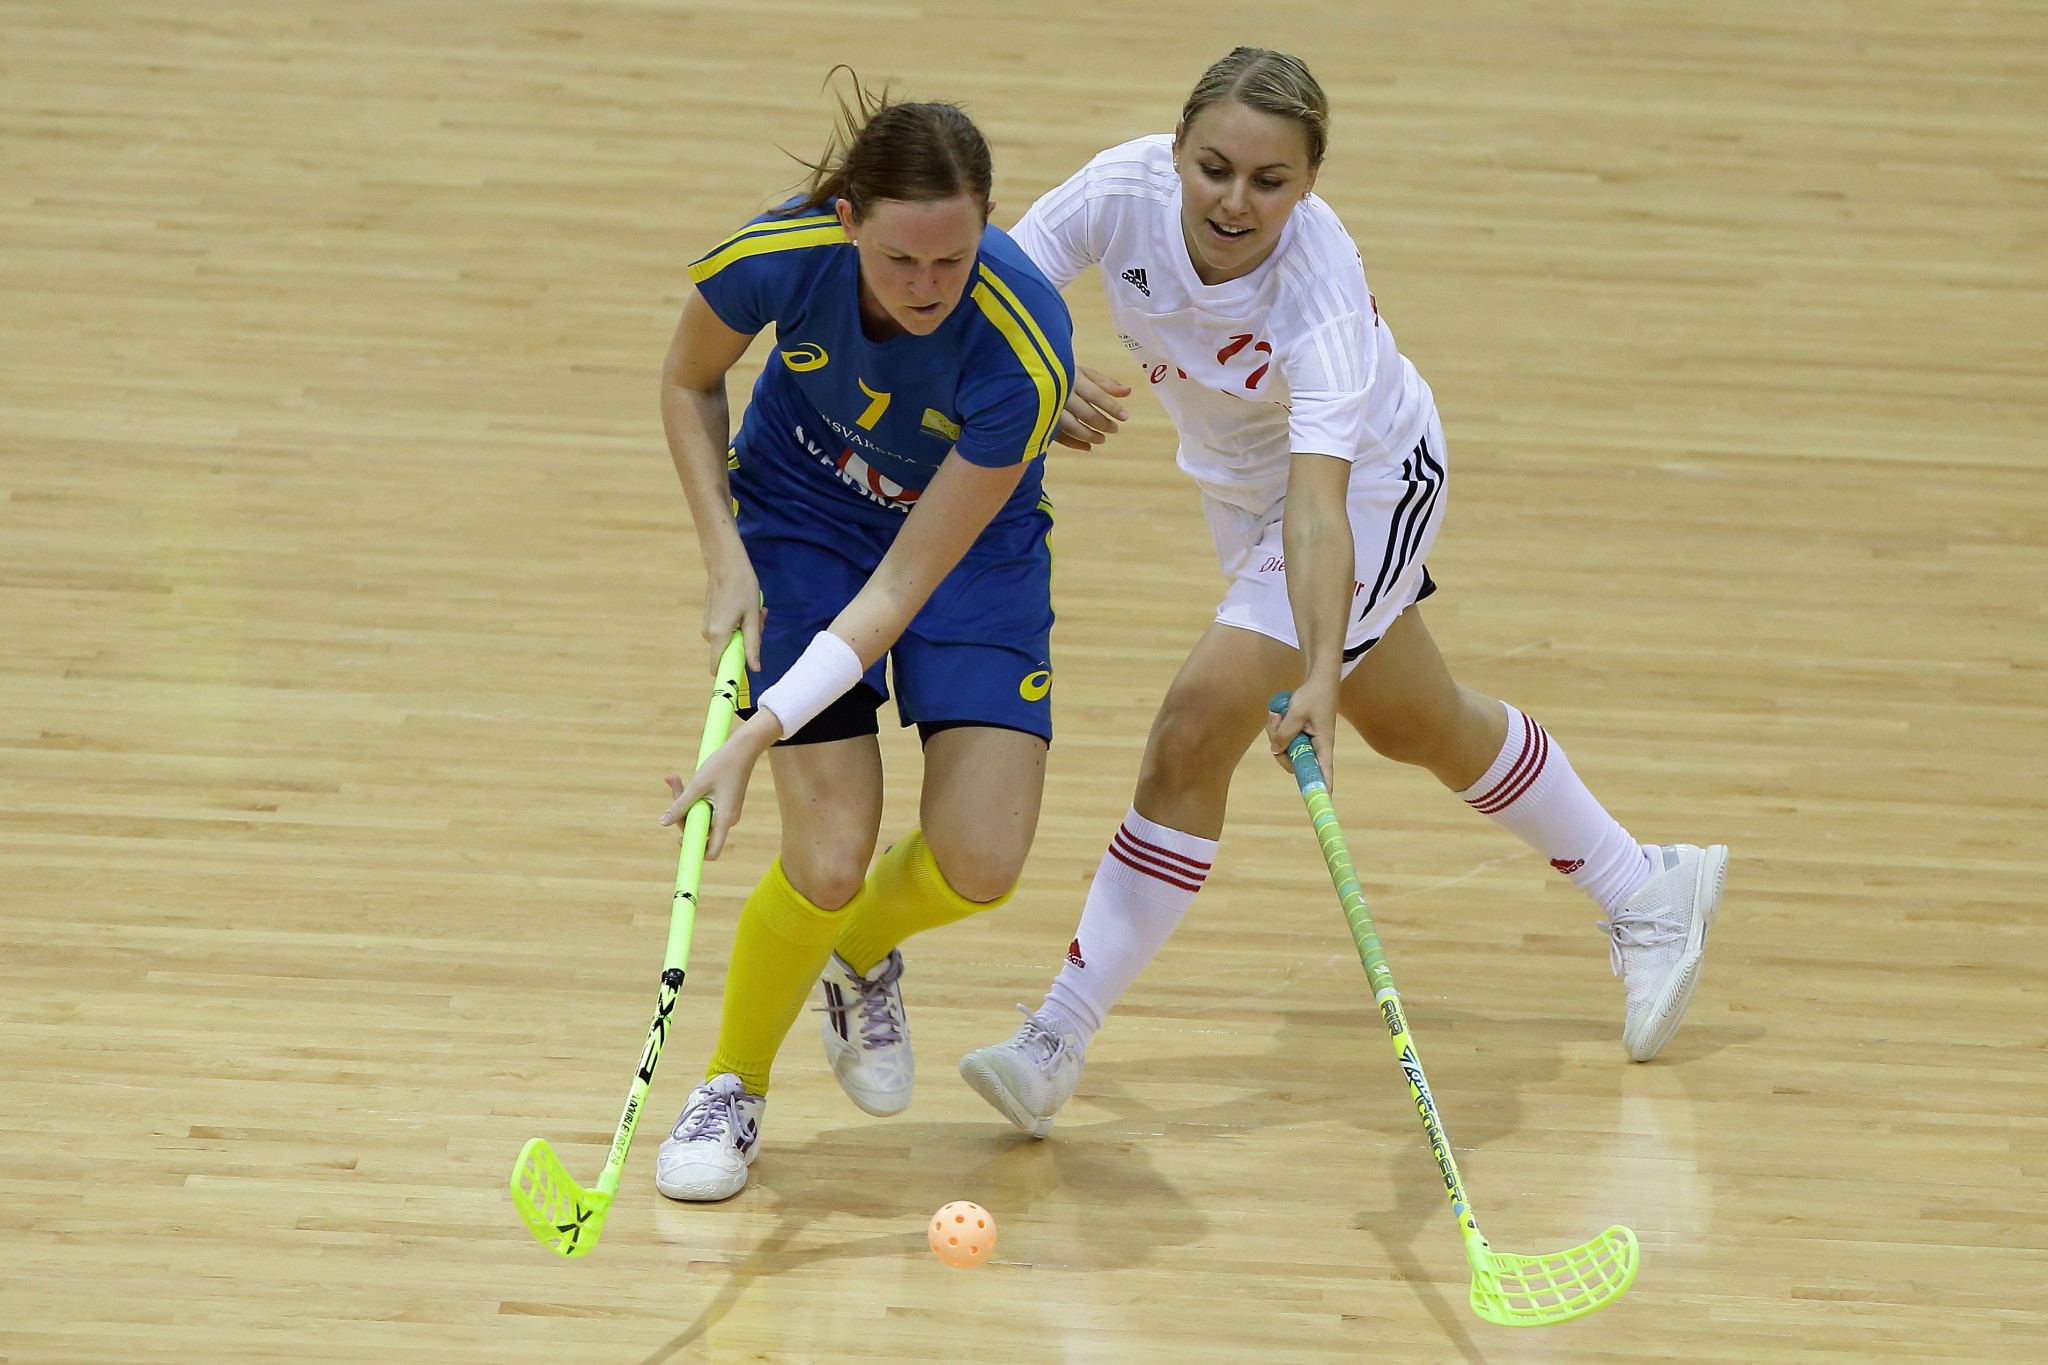 Sweden looking to win seventh title at 2020 Women's Under-19 World Floorball Championships